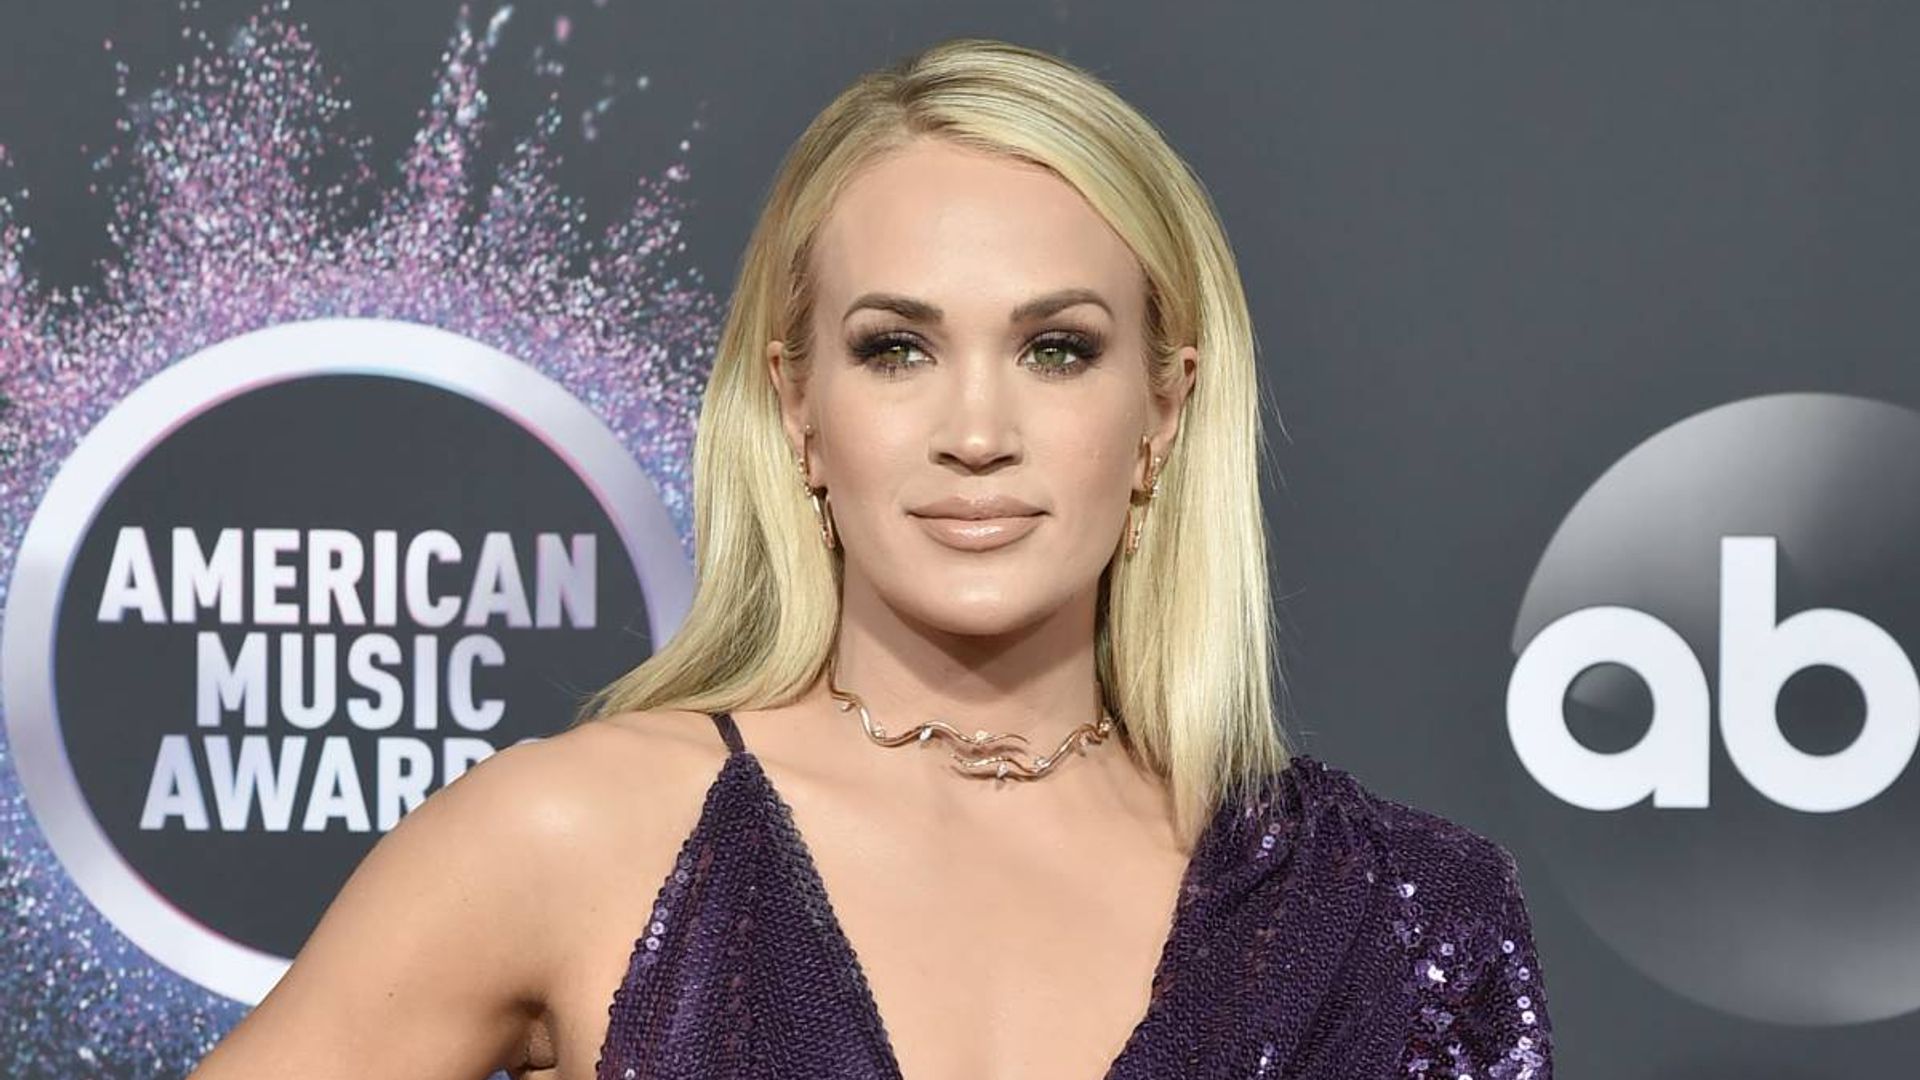 Carrie Underwood Says She Won't Be Back Hosting CMA Awards in 2020